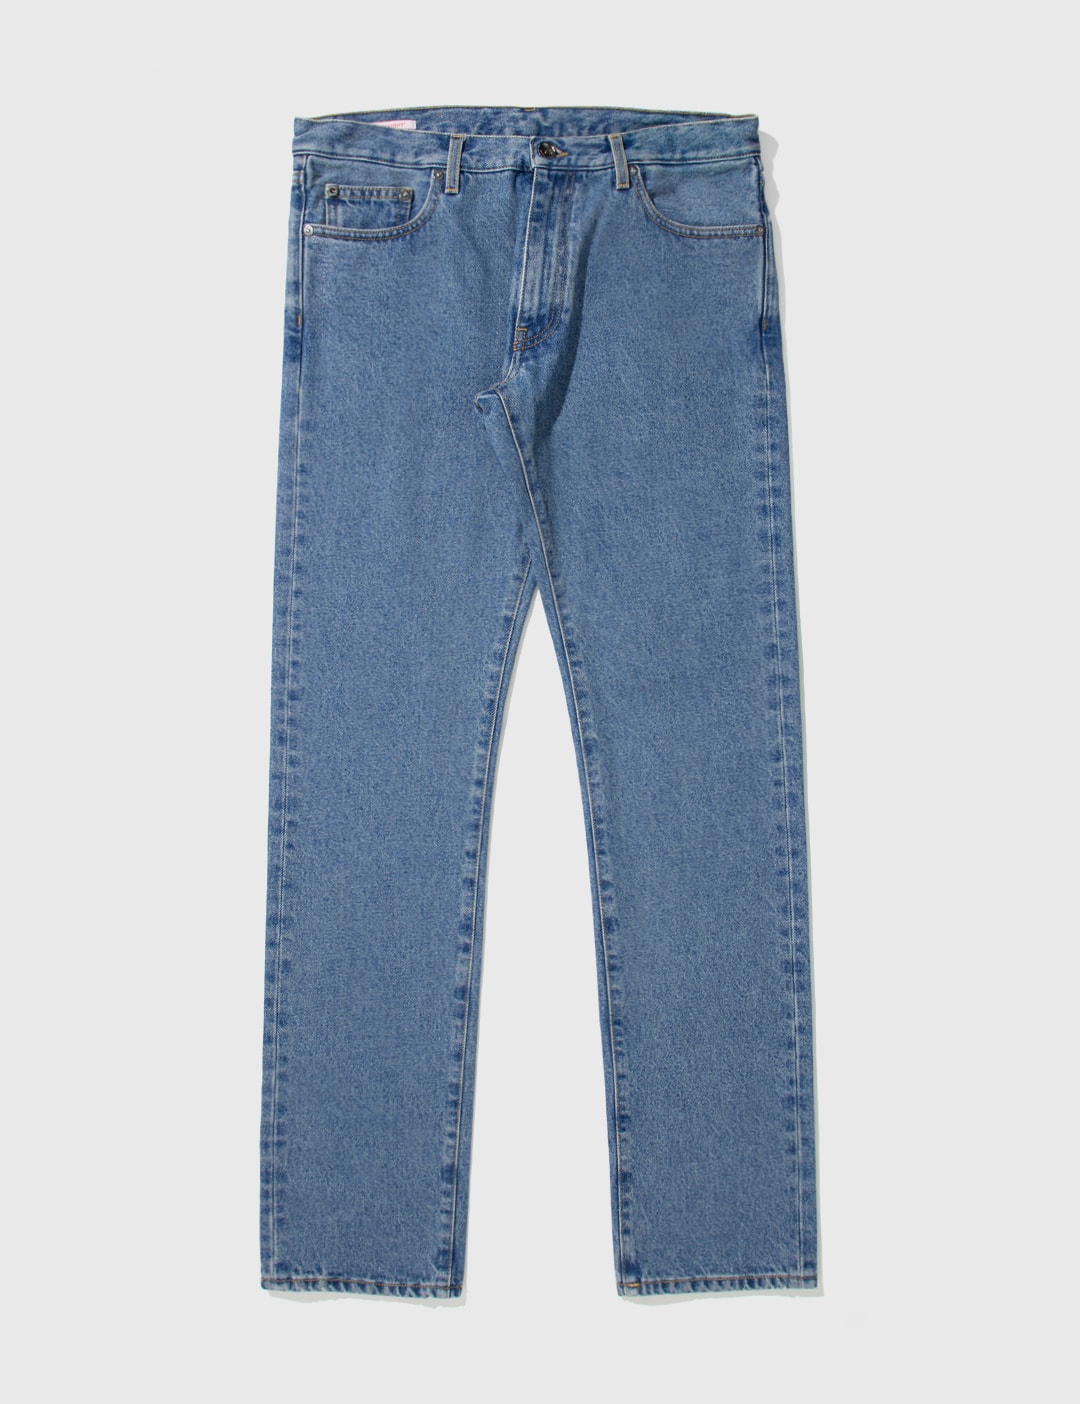 - Tab Slim Jeans | HBX - Globally Curated Fashion Lifestyle by Hypebeast